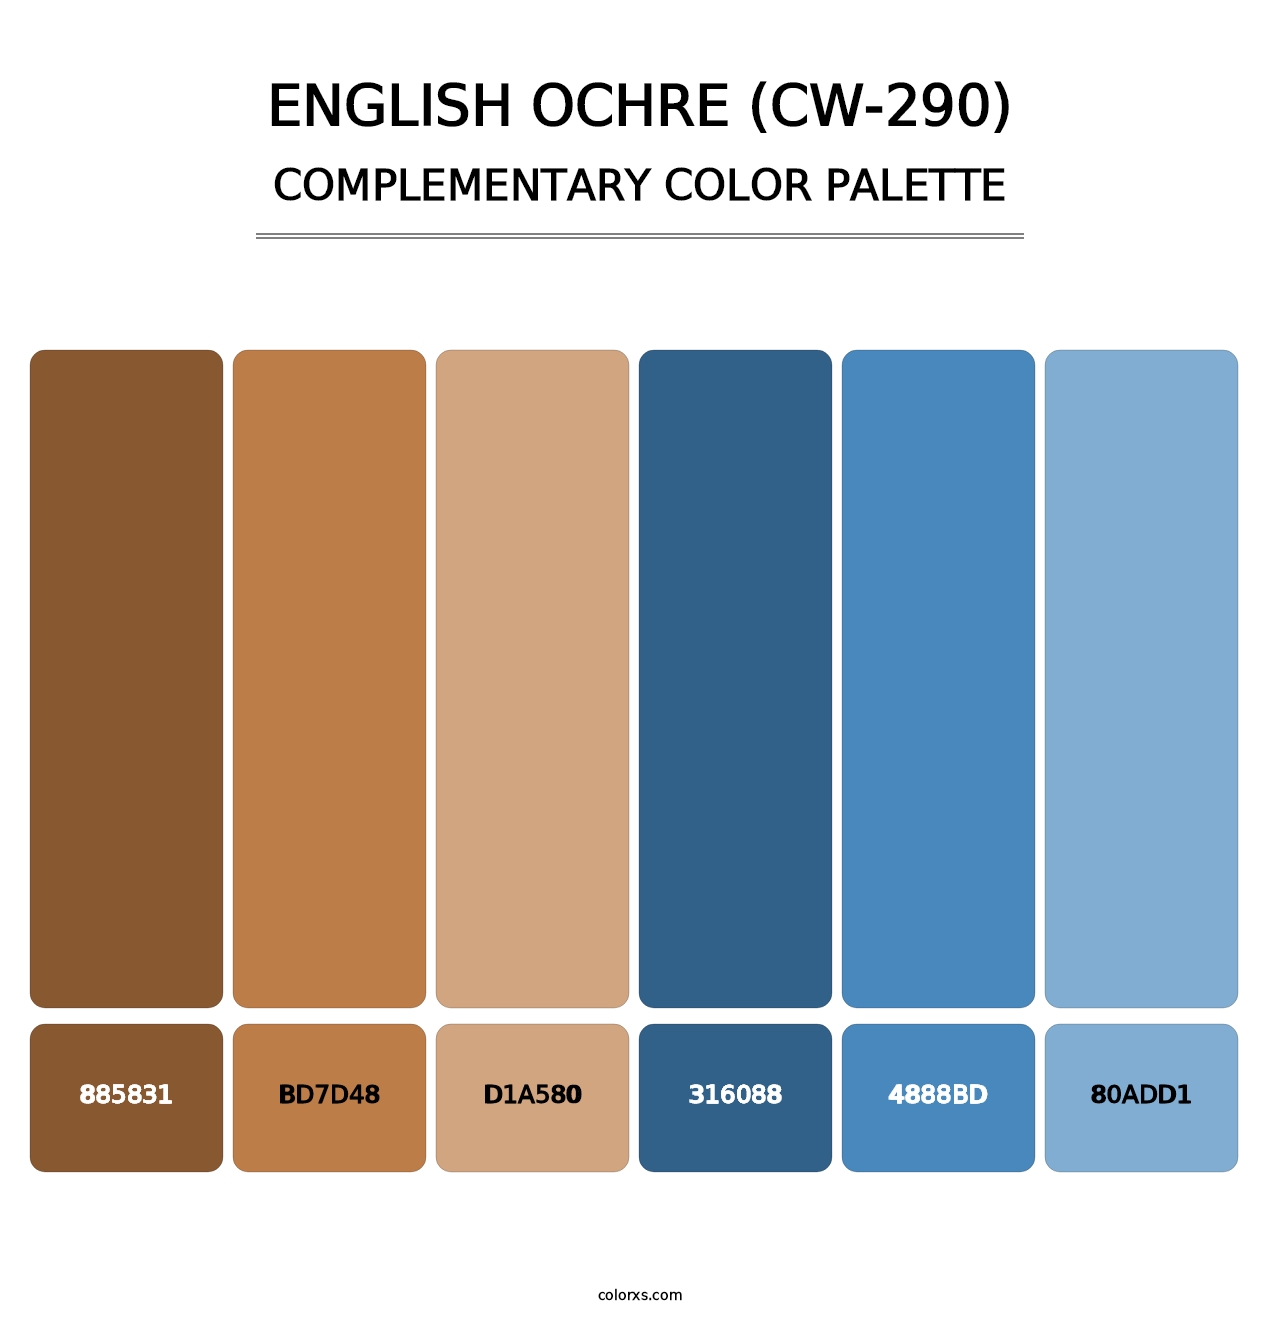 English Ochre (CW-290) - Complementary Color Palette